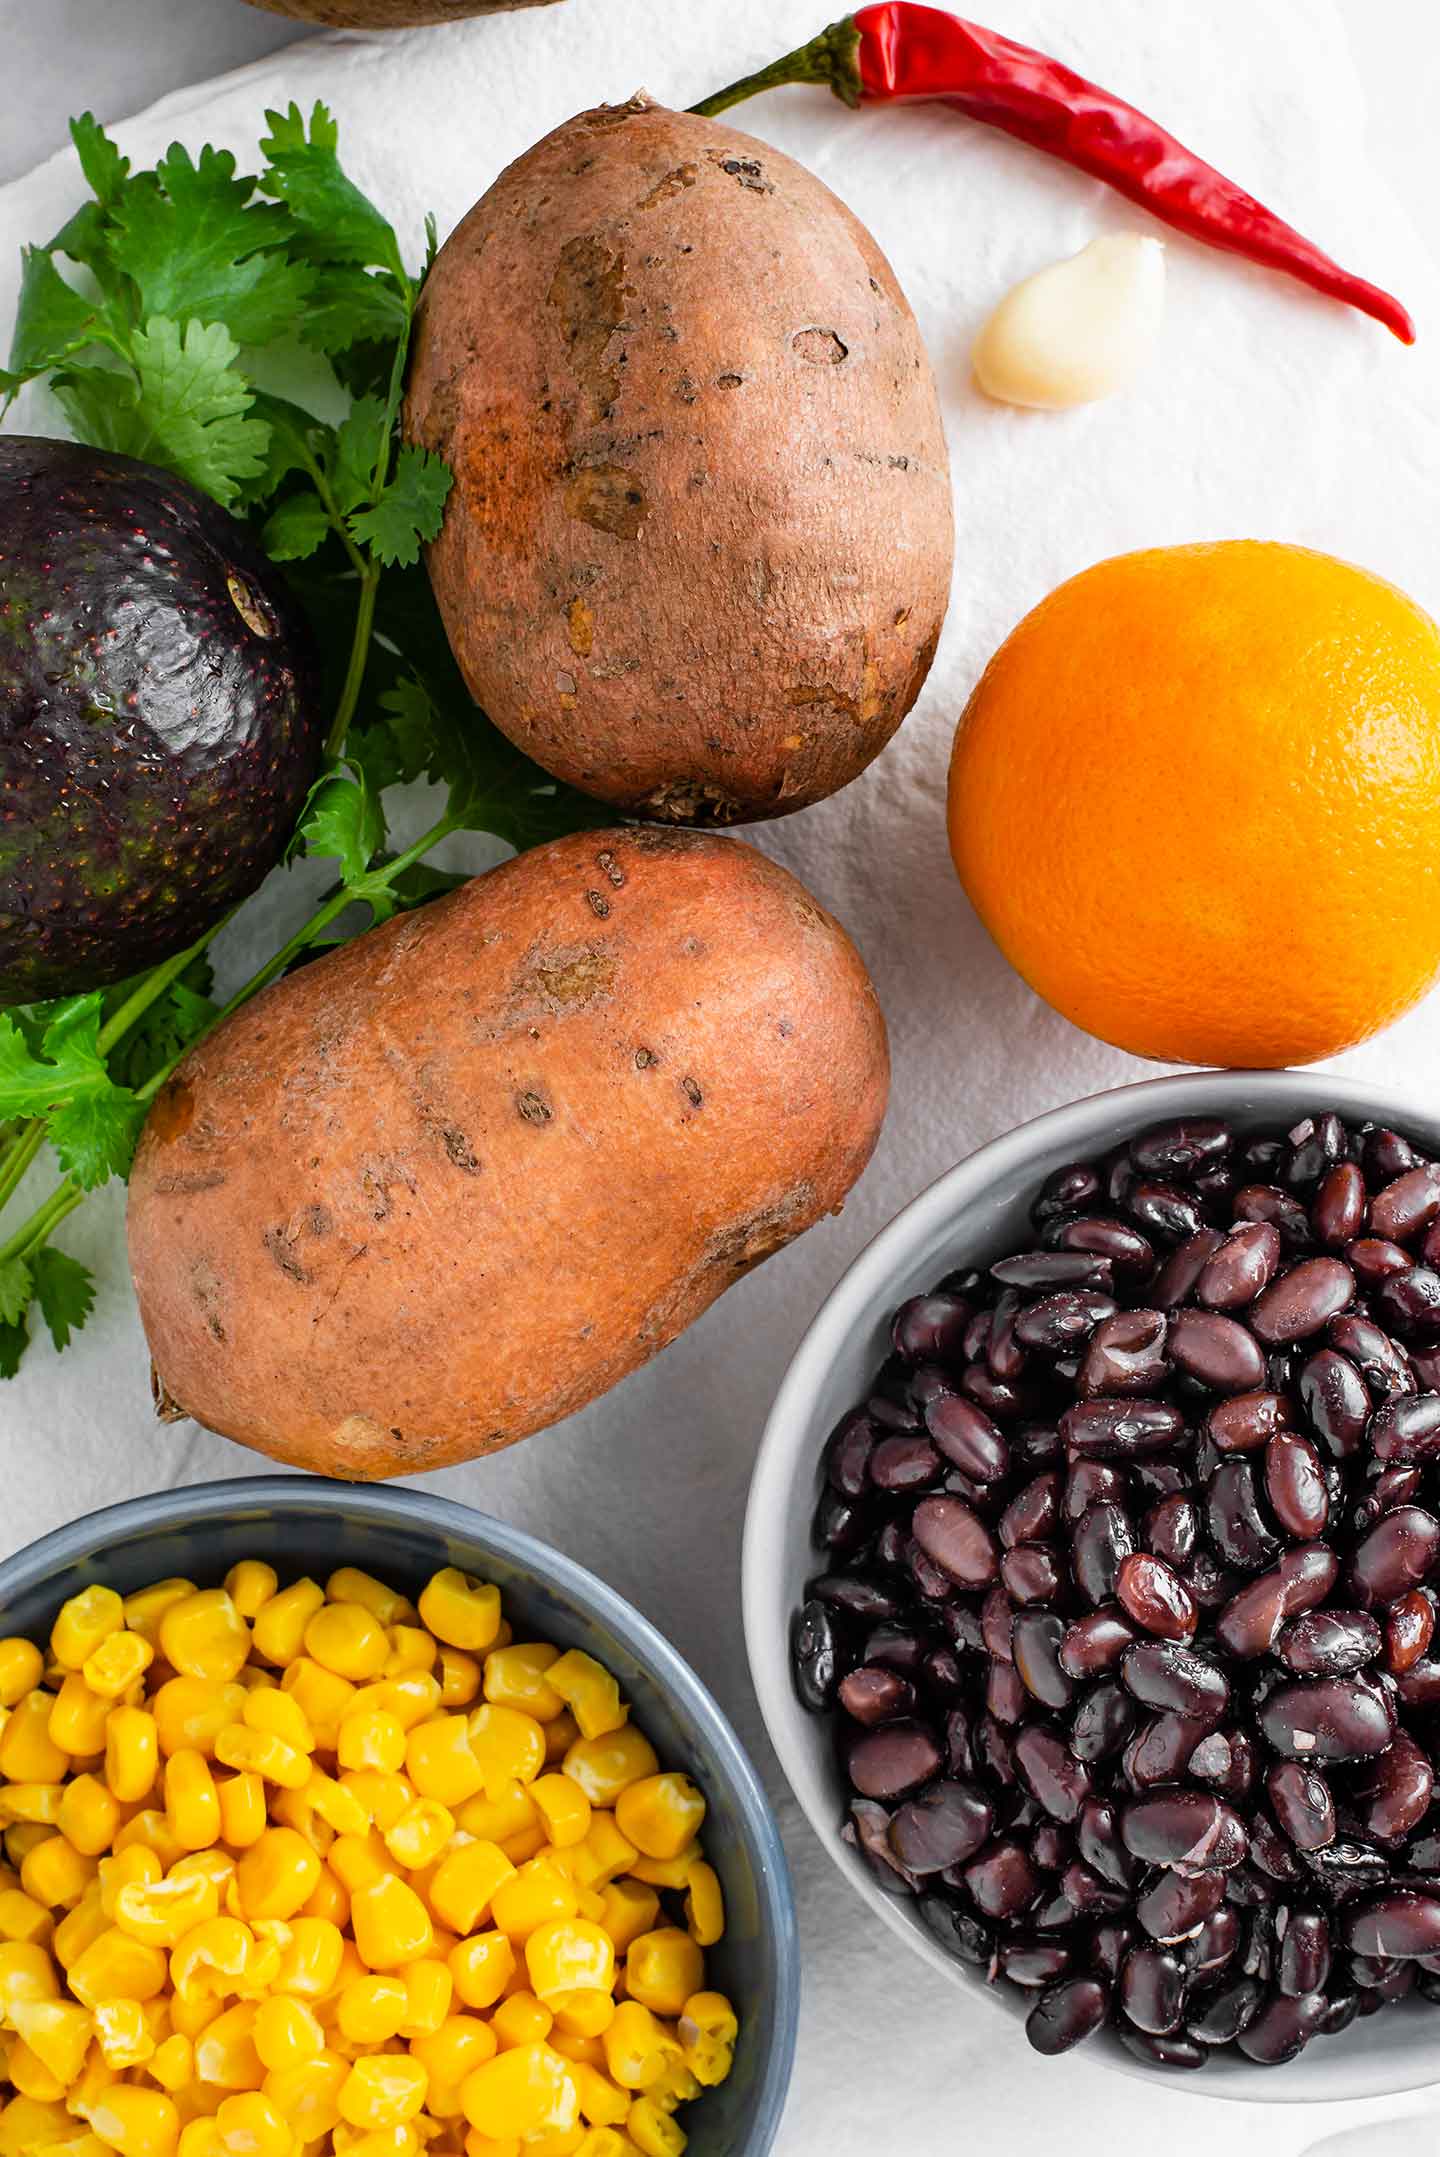 Top down view of ingredients on a white tray. Sweet potatoes, corn, black beans, an avocado, an orange, cilantro, a hot chilli pepper, and a clove of garlic are pictured.